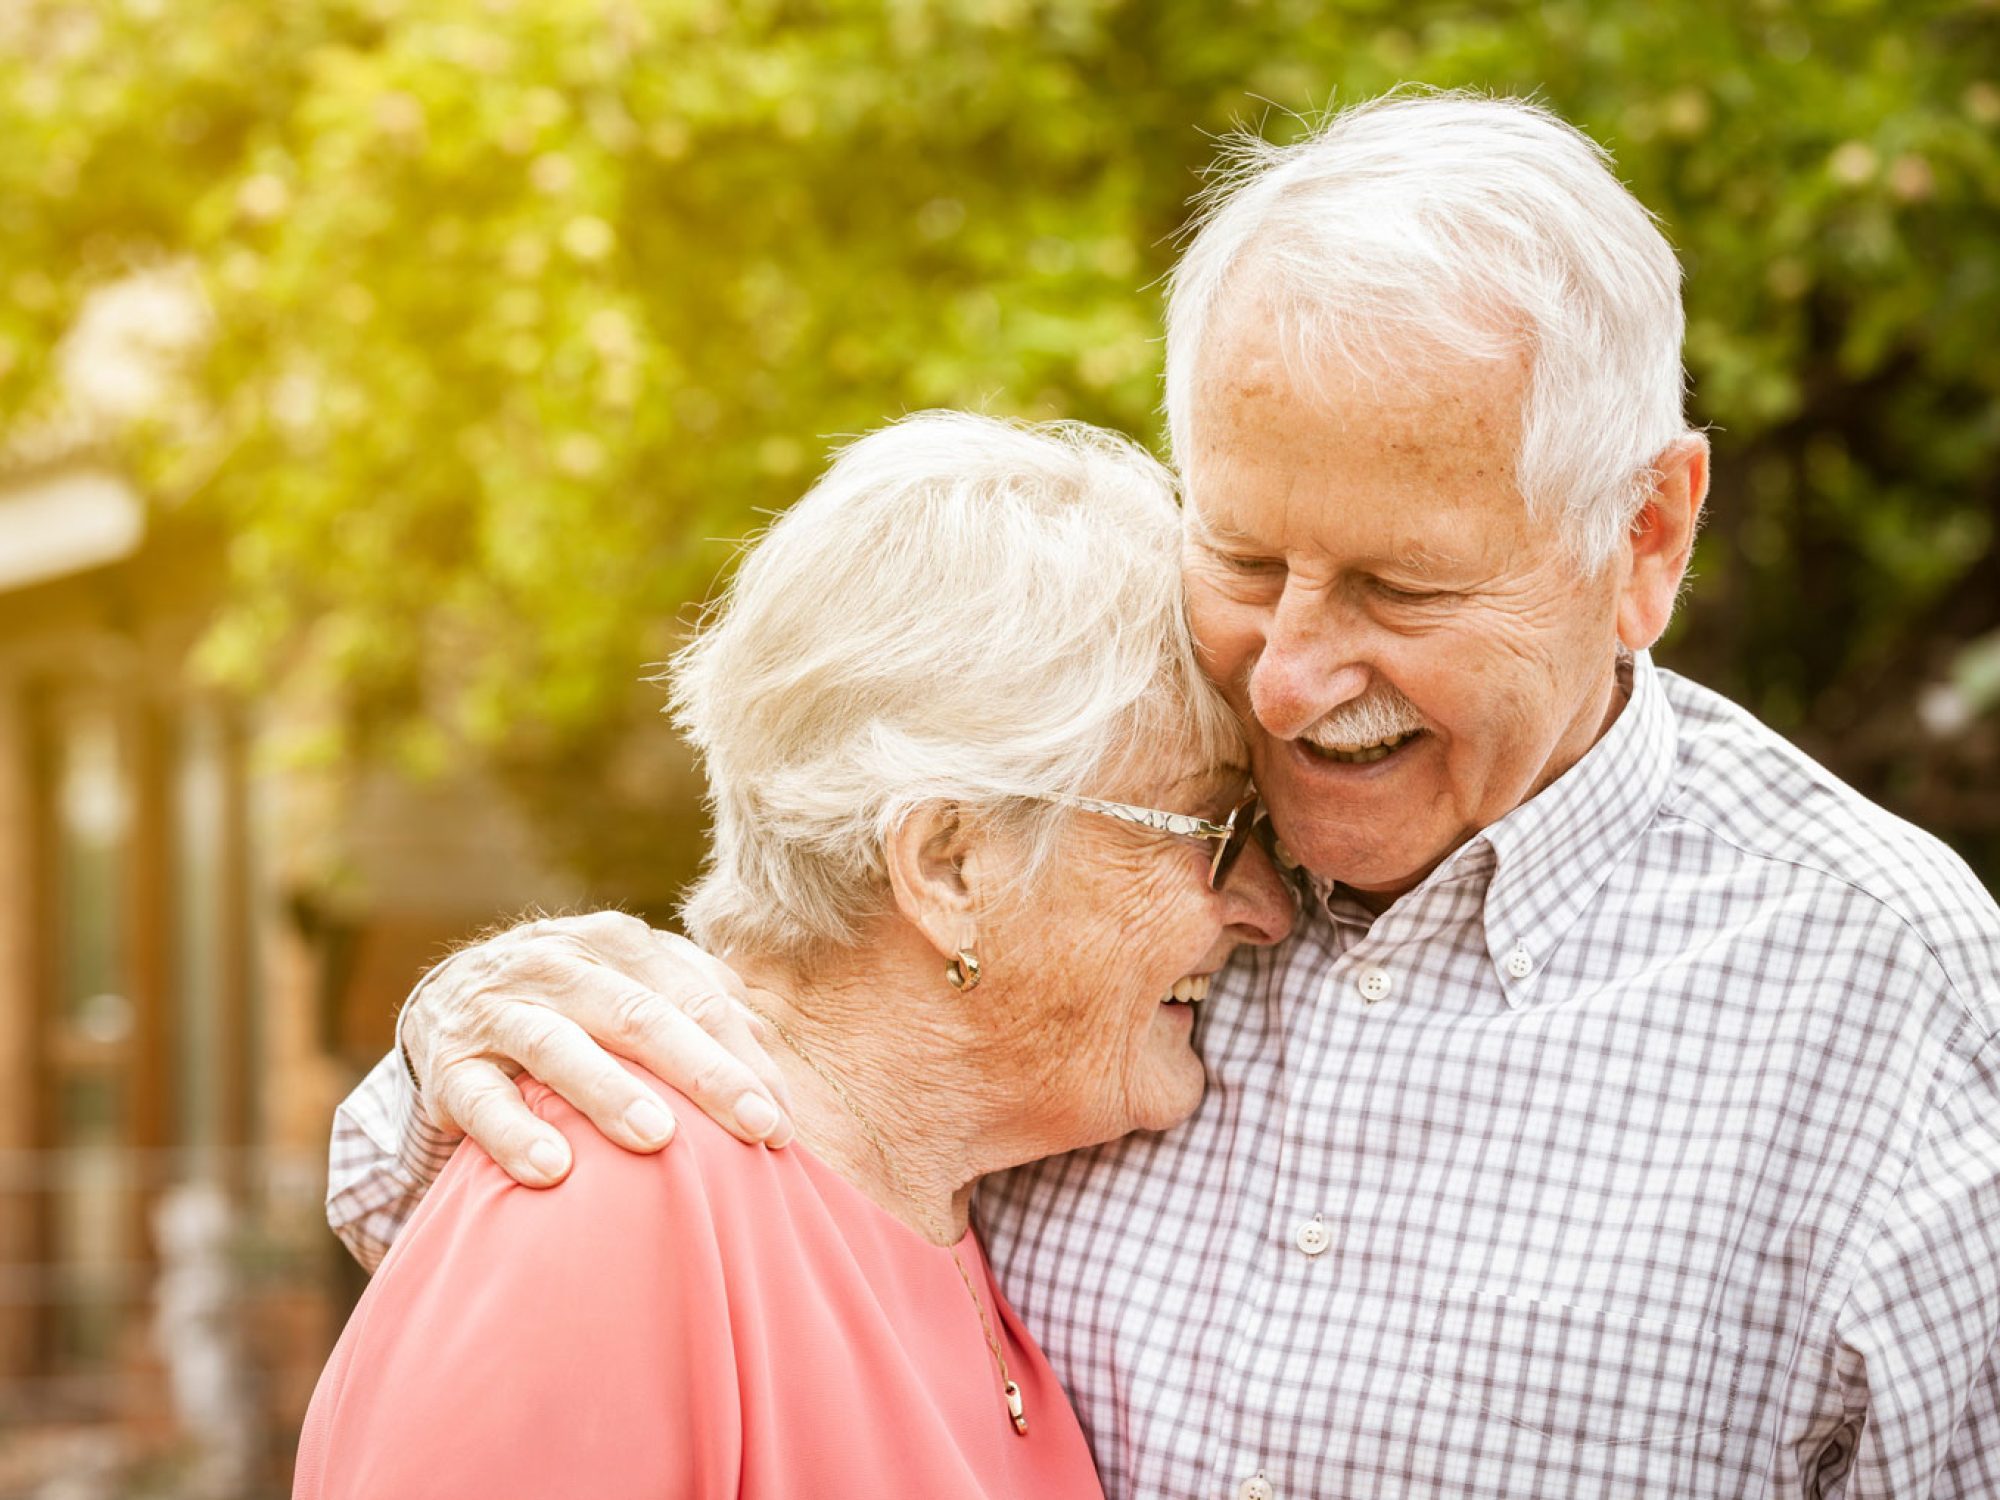 An older man and woman happily hugging outside